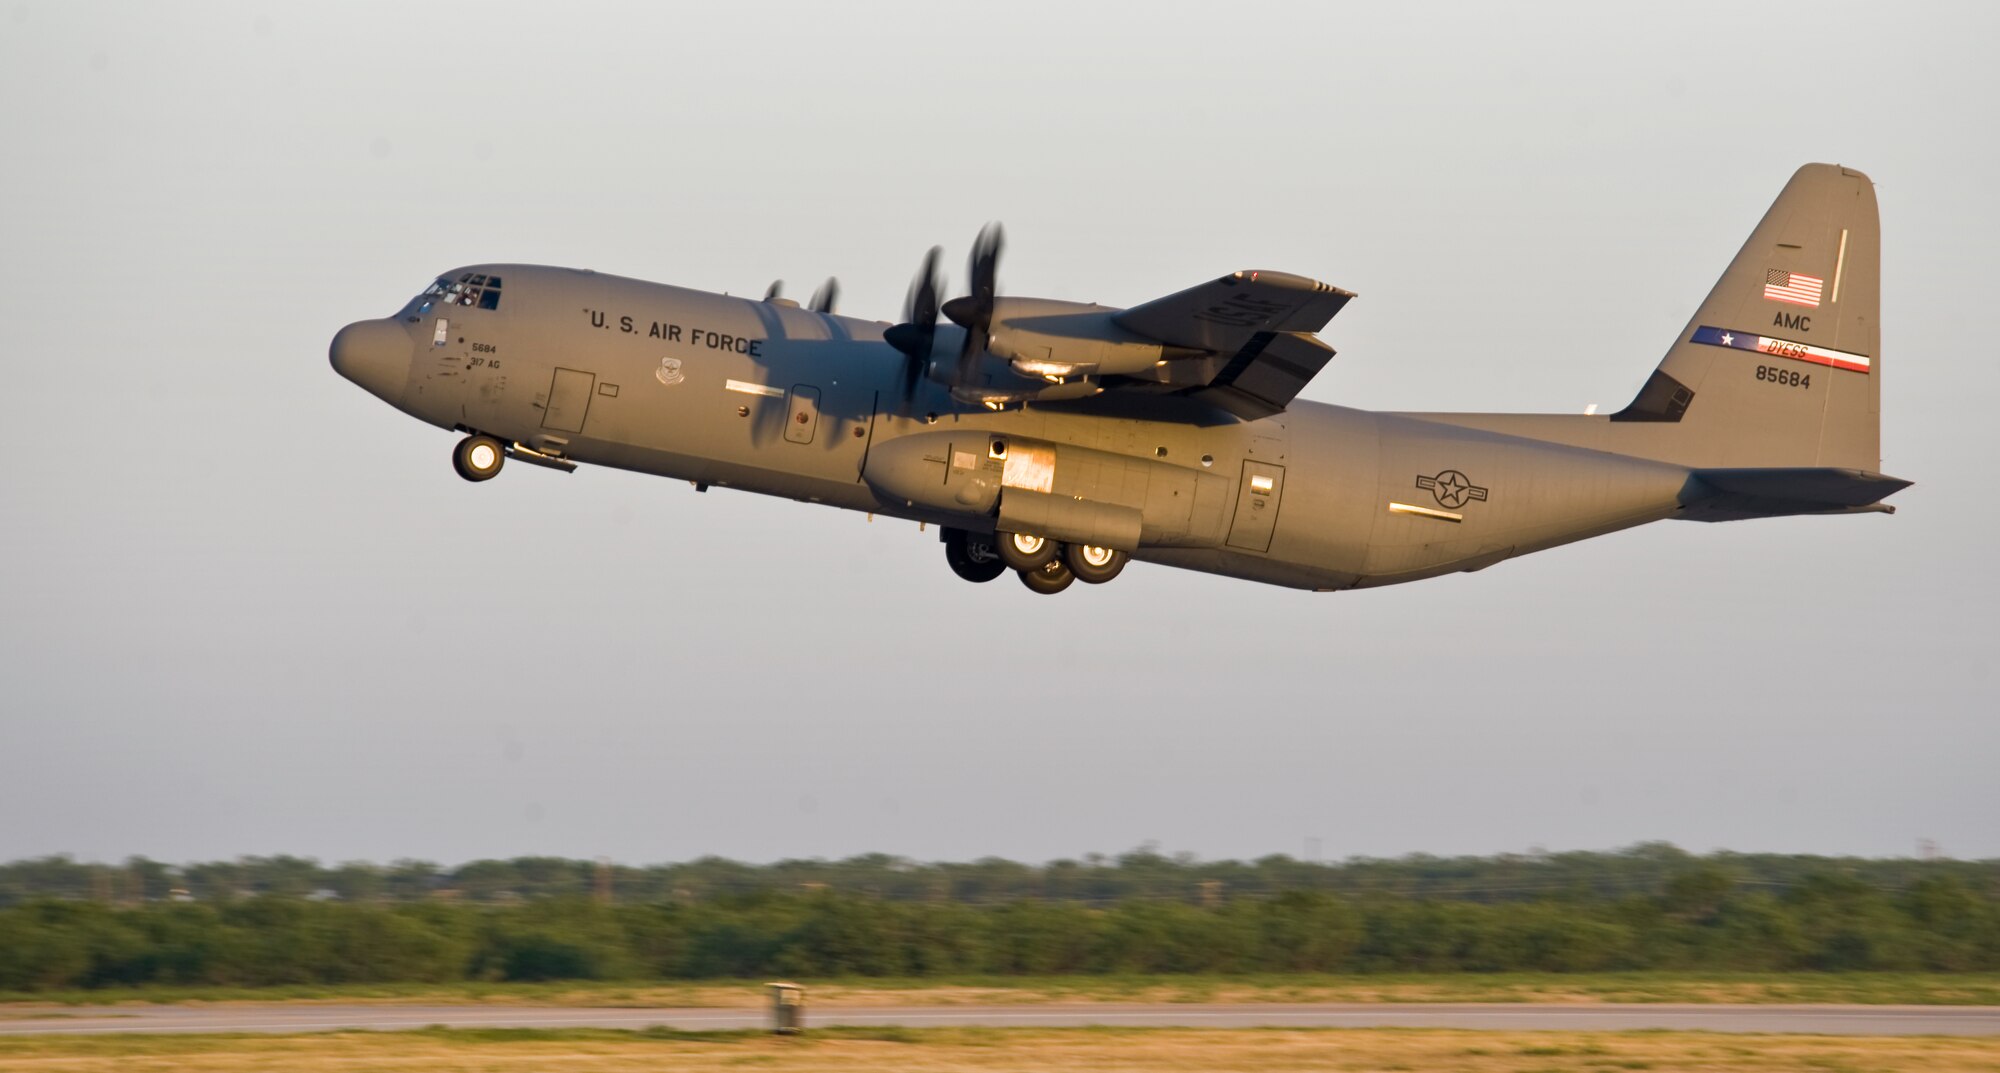 A 317th Airlift Group (AG) C-130J takes off, headed to Pope Army Airfield, N.C., in support of the Denton Program June 4, 2013, at Dyess Air Force Base, Texas. The Denton Amendment allows the U.S. military aircraft to transport, on a space-available basis, humanitarian supplies from non-government organizations to people around the world who are in need of assistance.  The 317th AG transported the supplies to Pope Army Airfield, N.C., where it will be taken to Joint Base Charleston Air Base, S.C., and then to Afghanistan. The supplies were donated by Global Samaritan Resources. (U.S. Air Force photo by Senior Airman Jonathan Stefanko/Released)

